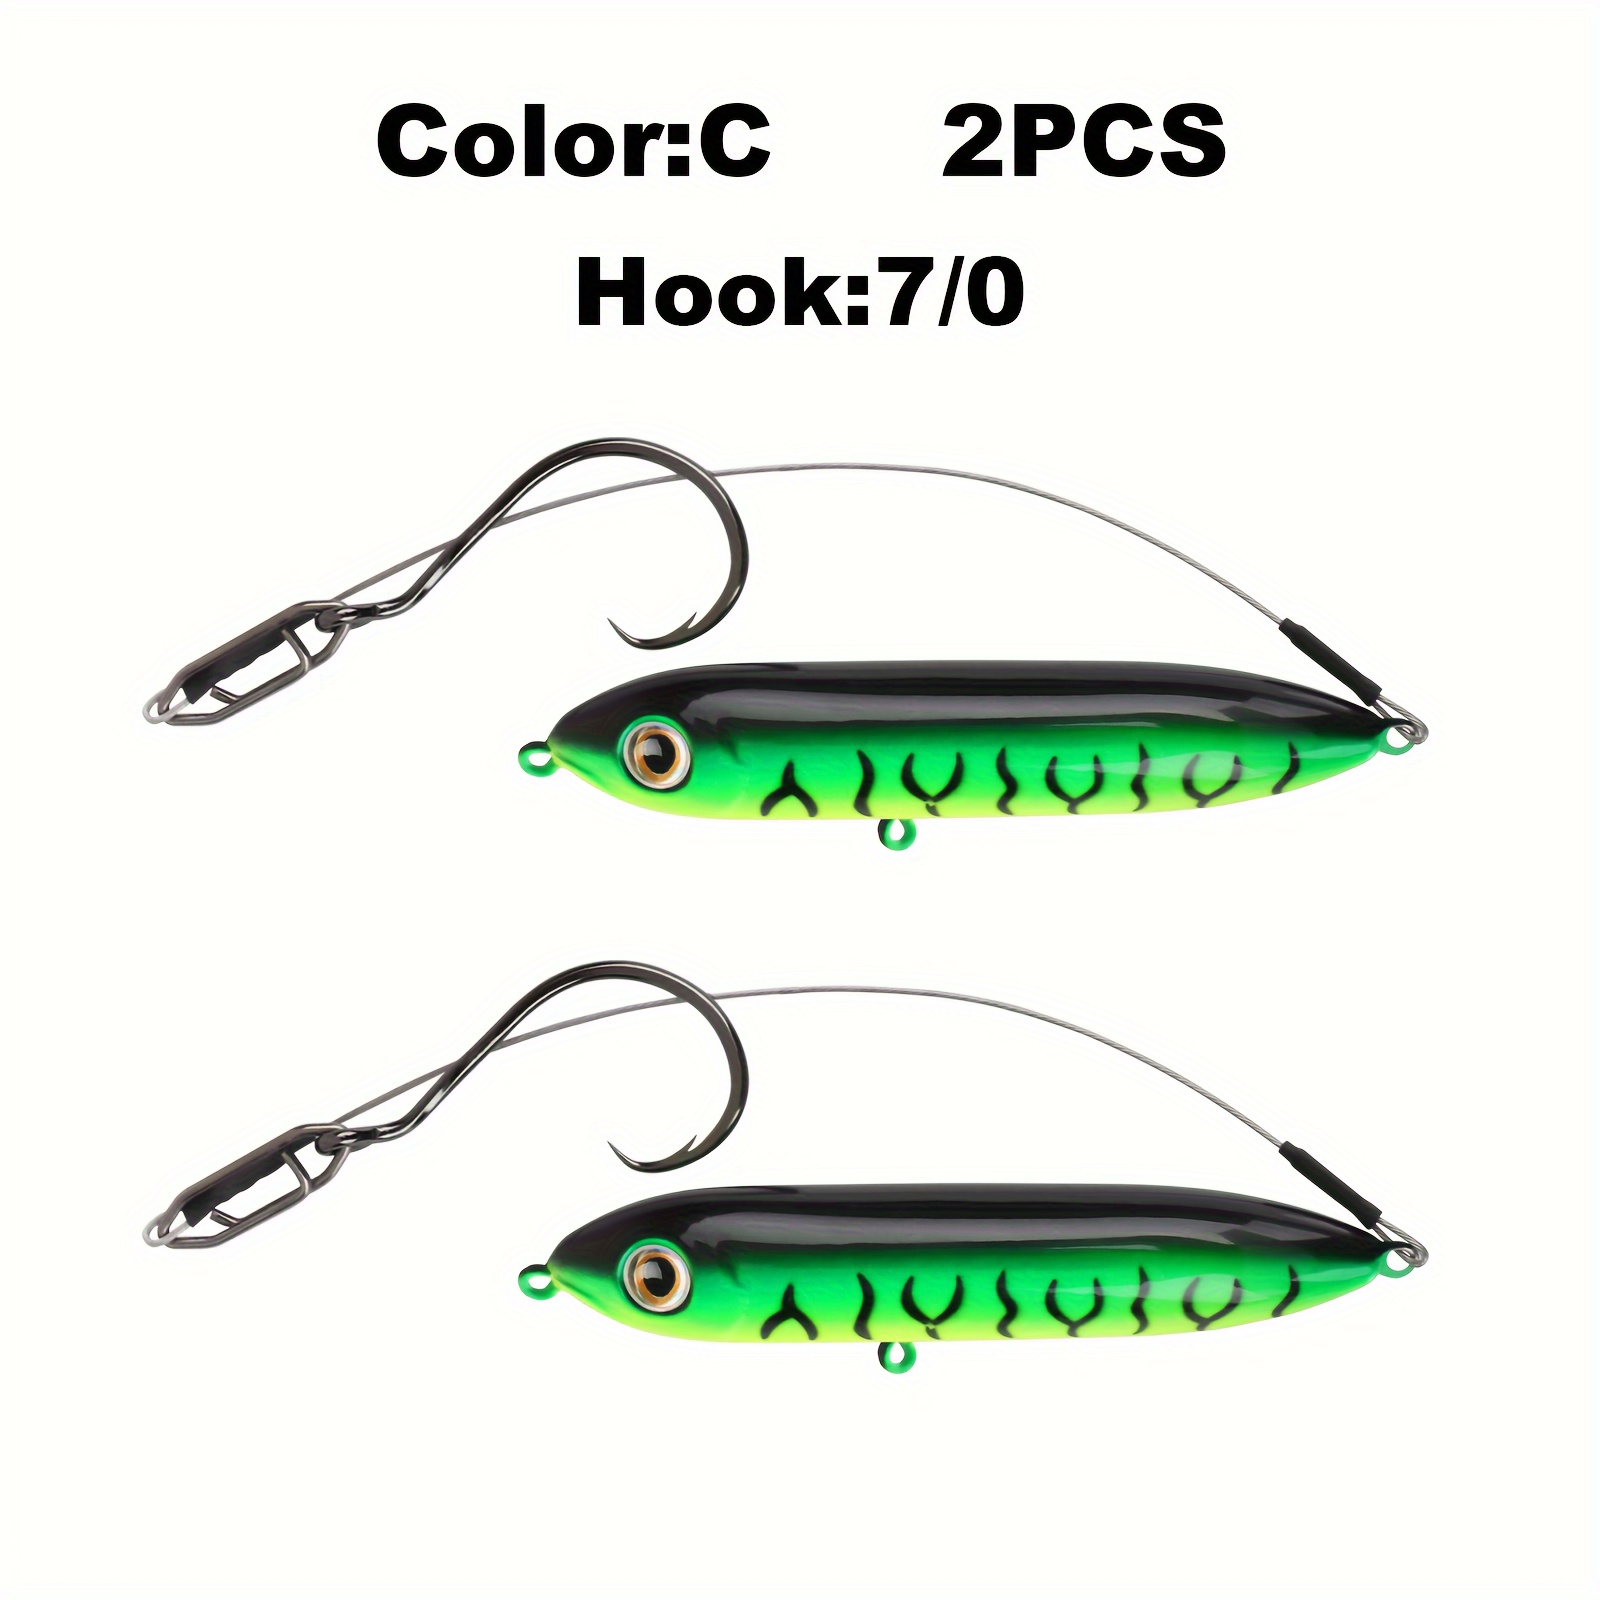 OCEAN CAT 10 Packs Feather Fish Skin 6 Hooks Fishing Rigs with String Hooks  Glow Fishing Beads High Carbon Hooks for Freshwater Saltwater Fishing Lures  Bait Rig Tackle — OCEAN CAT Fishing Tackle